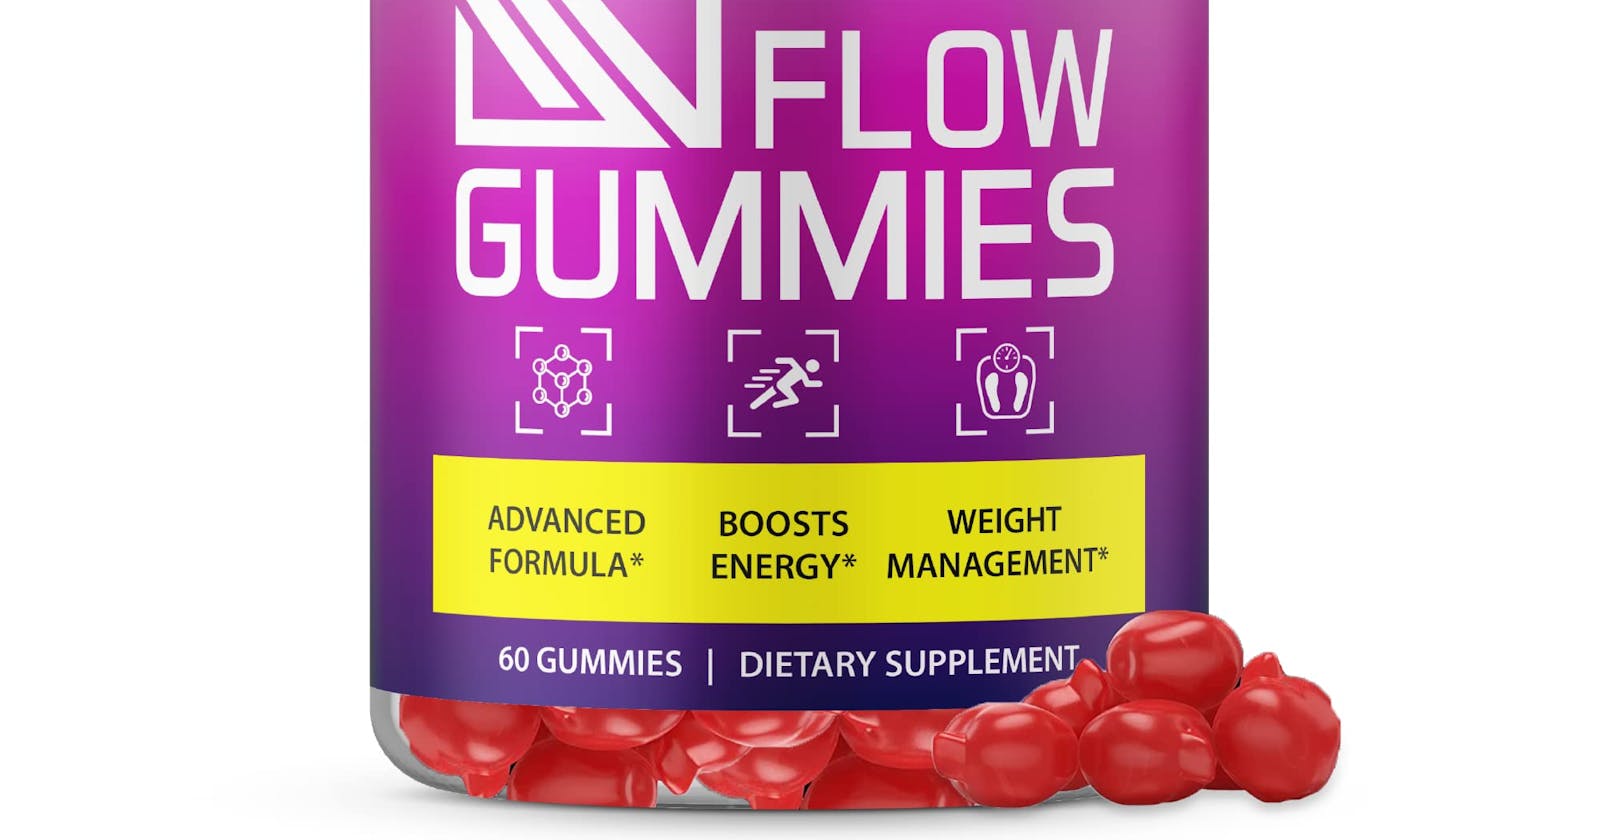 Experience Lasting Energy with Keto Flow Gummies